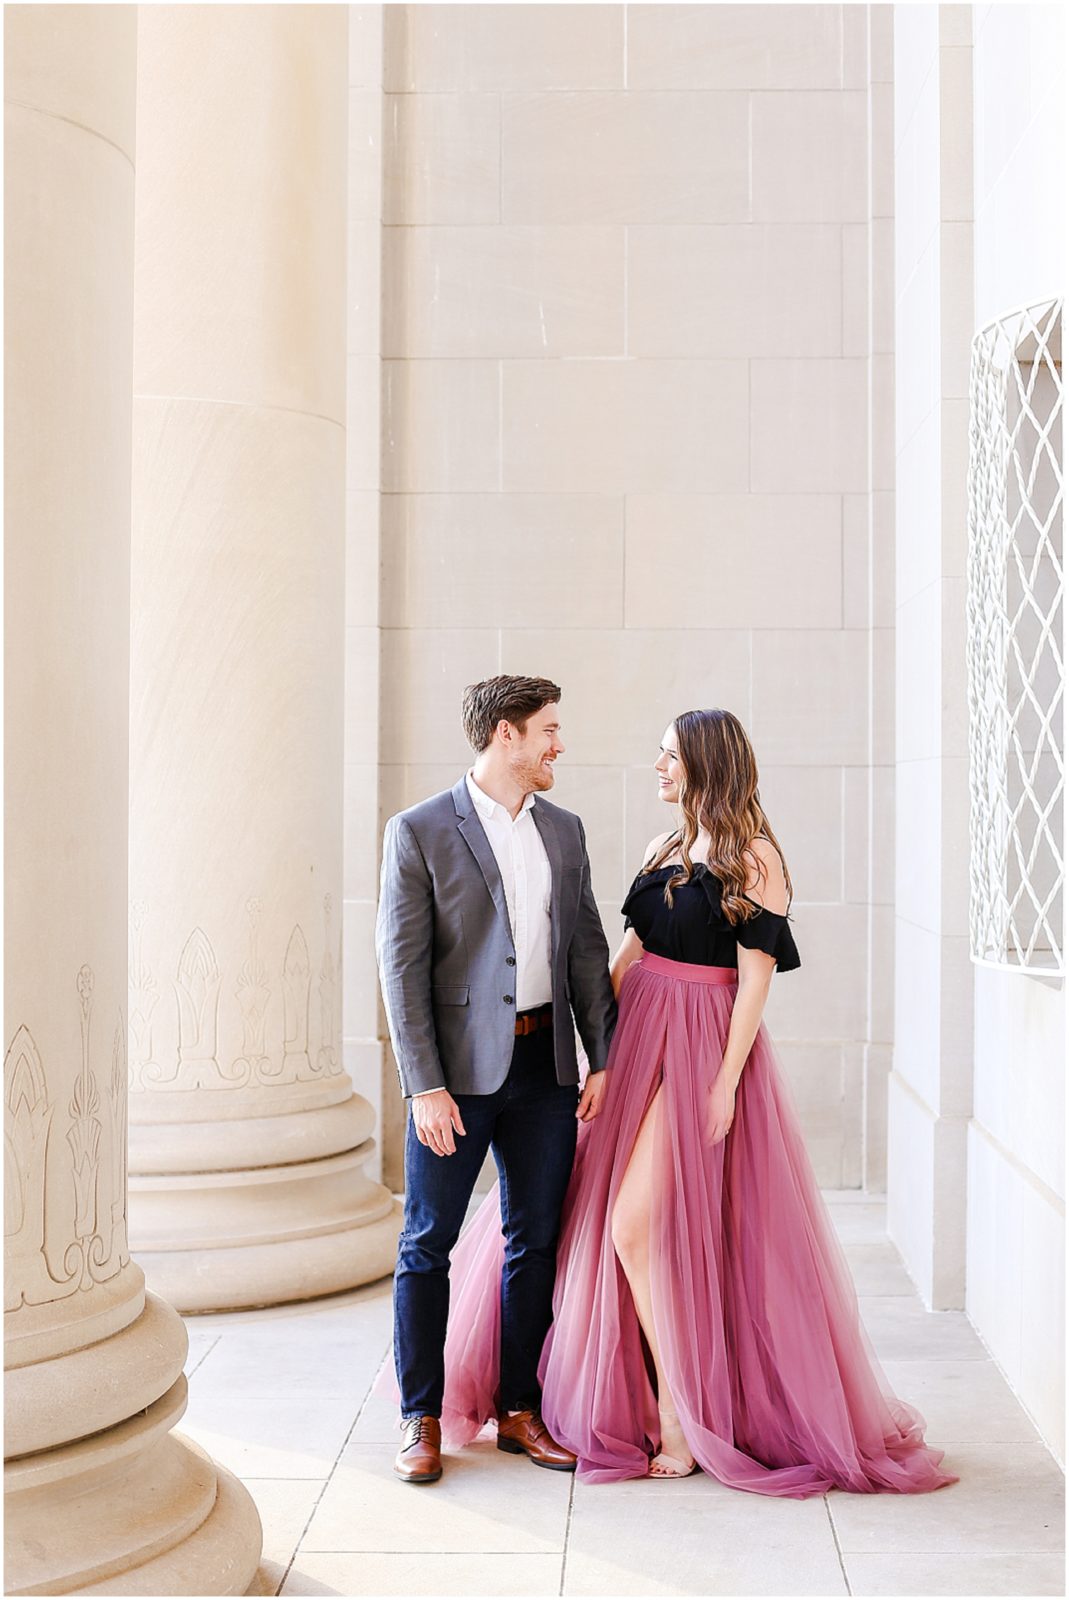 Beautiful Engagement Photos at the Kansas City Nelson Atkins Museum by Mariam Saifan Photography - Where to take photos in KC - What to wear for engagement photos - Kansas City Wedding Photographer